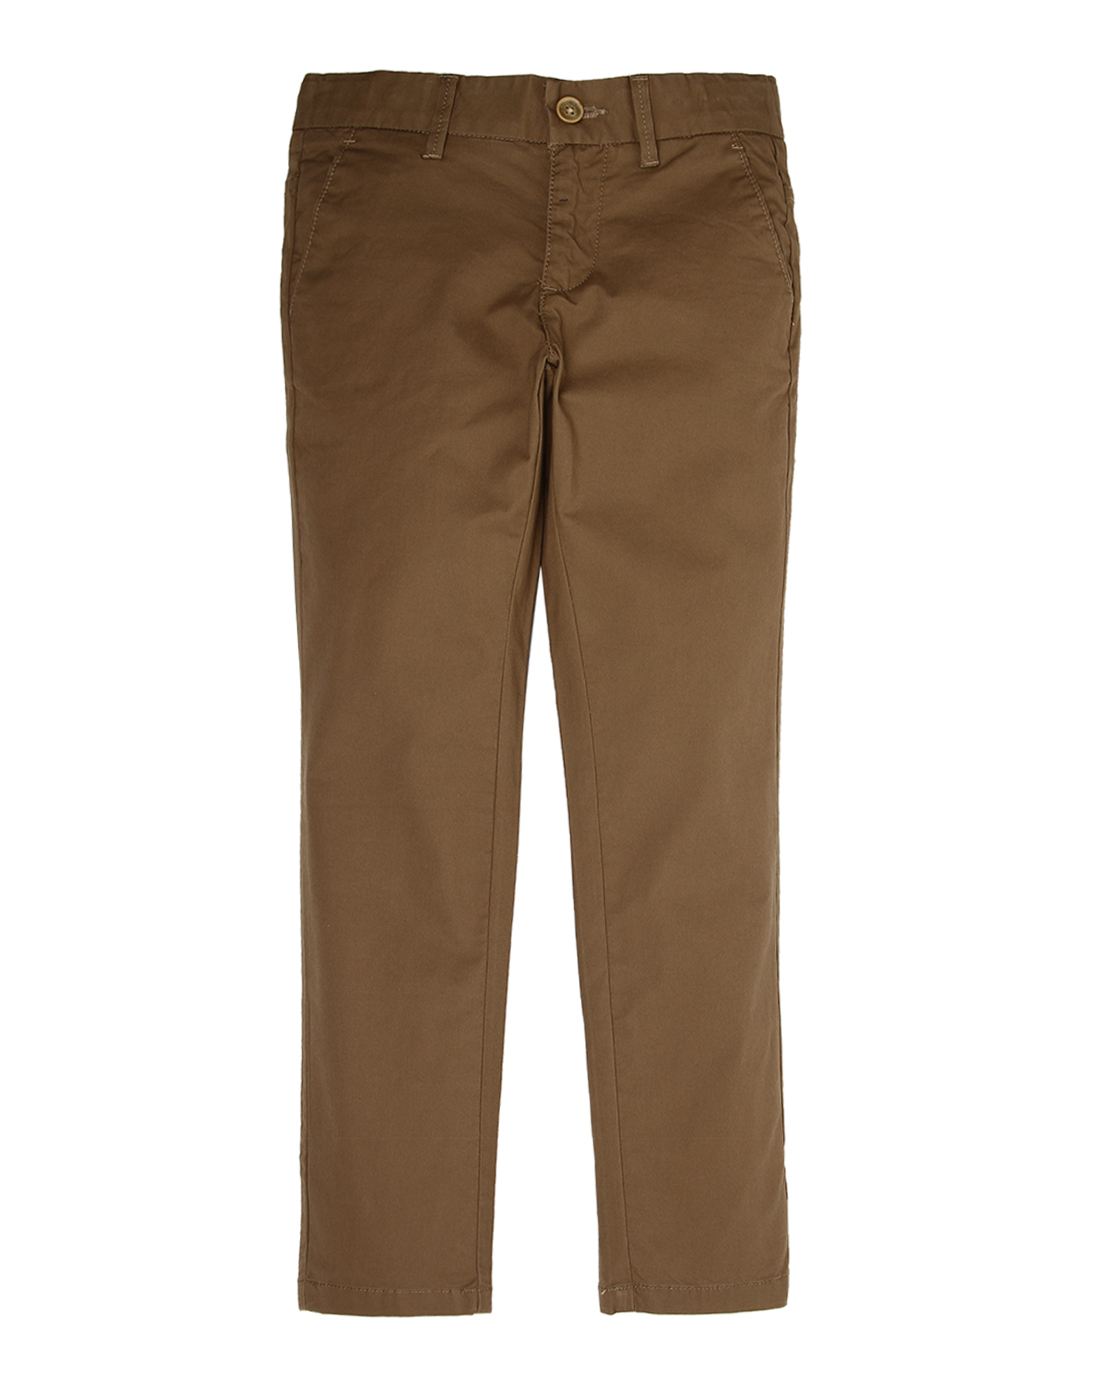 Buy Indian Terrain Men's Brown Cotton Slim Fit Casual Trousers at Amazon.in